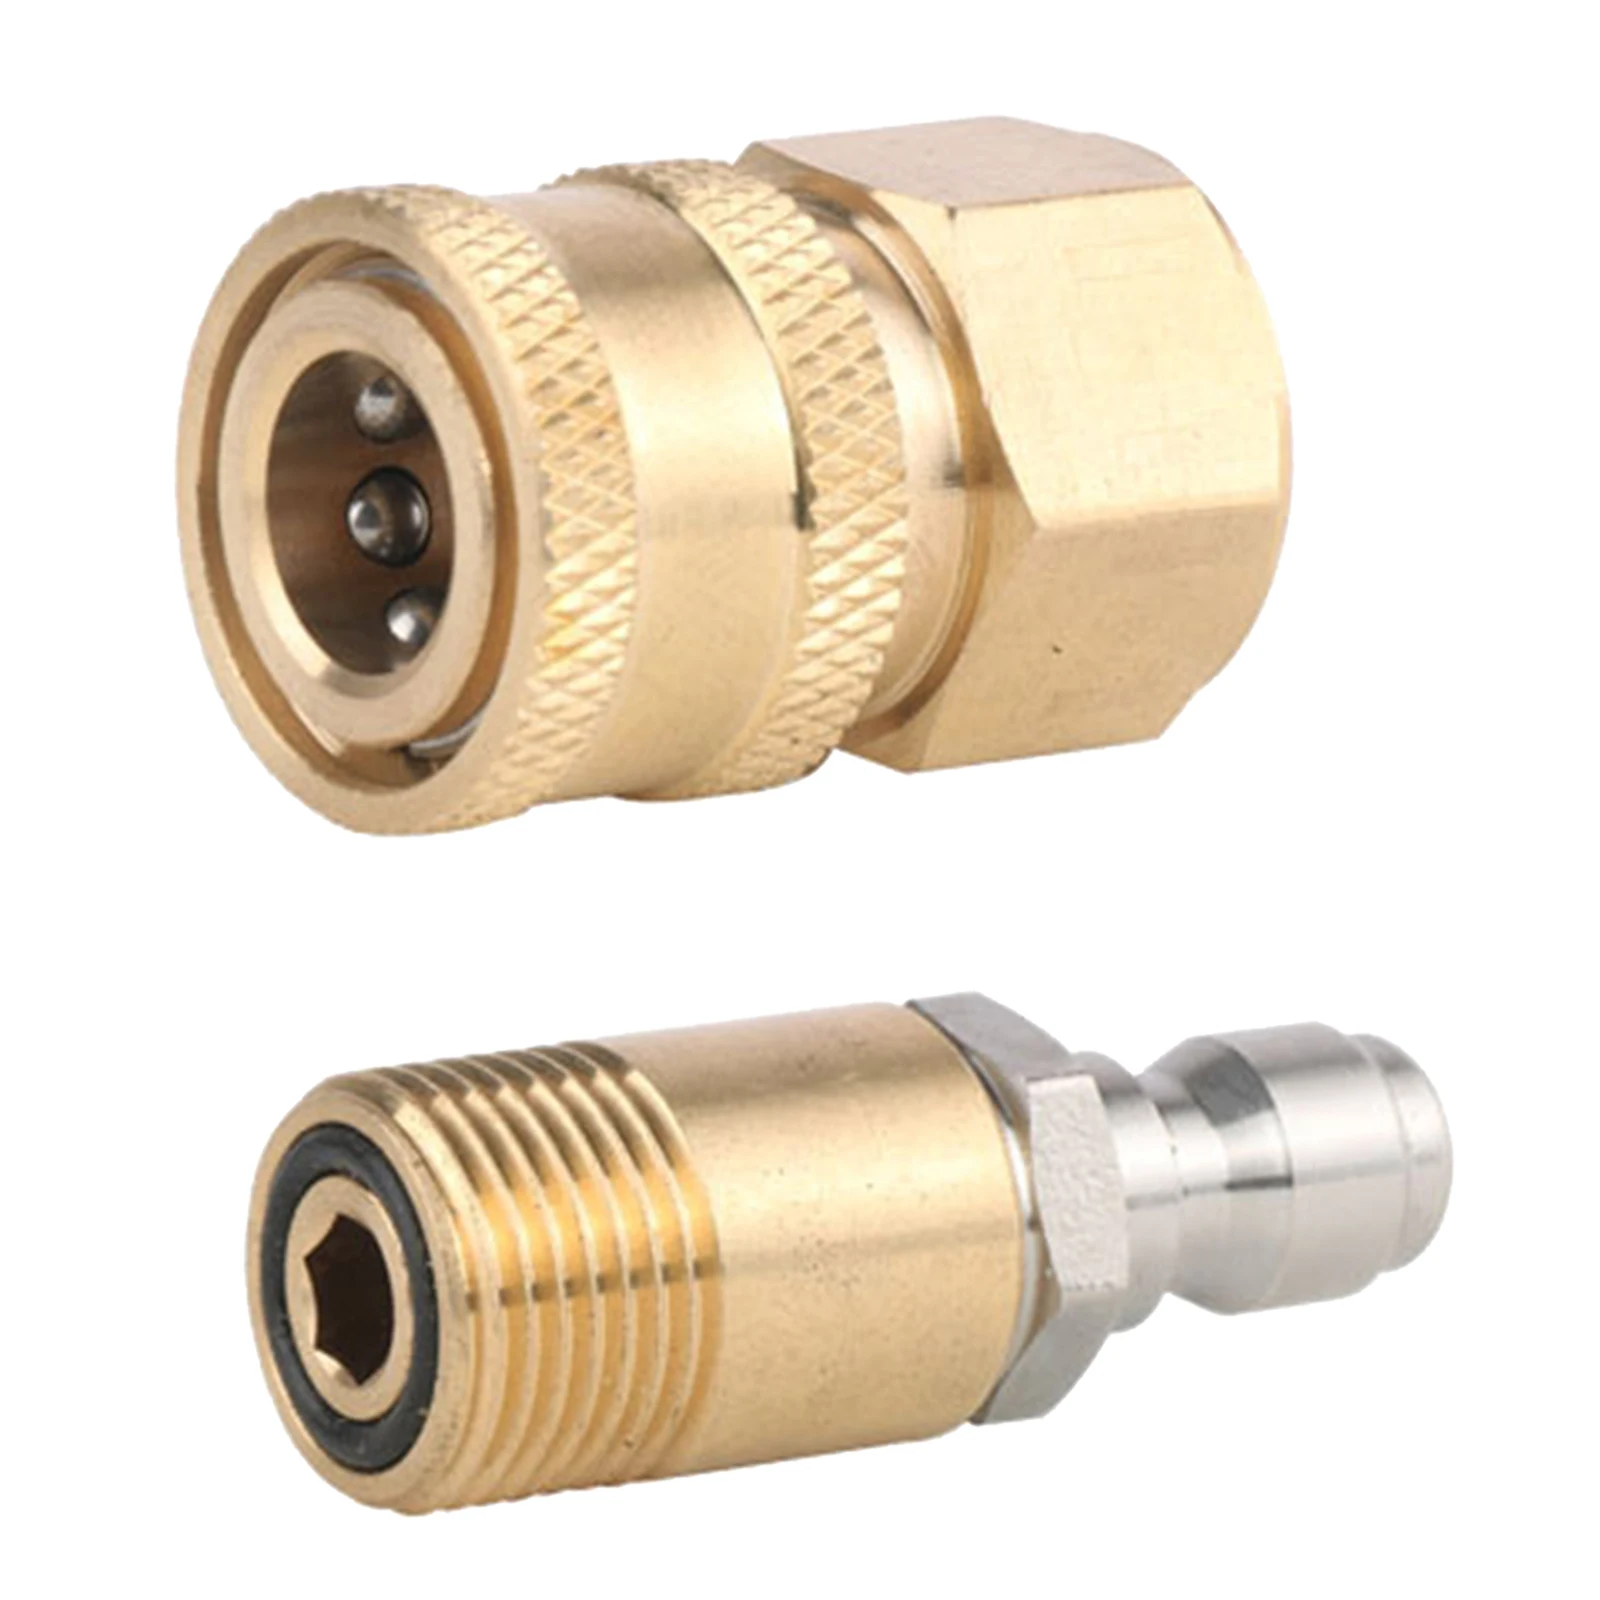 Pressure Washer Twist Type Quick Connector With 22mm Female X 1/4" Female 